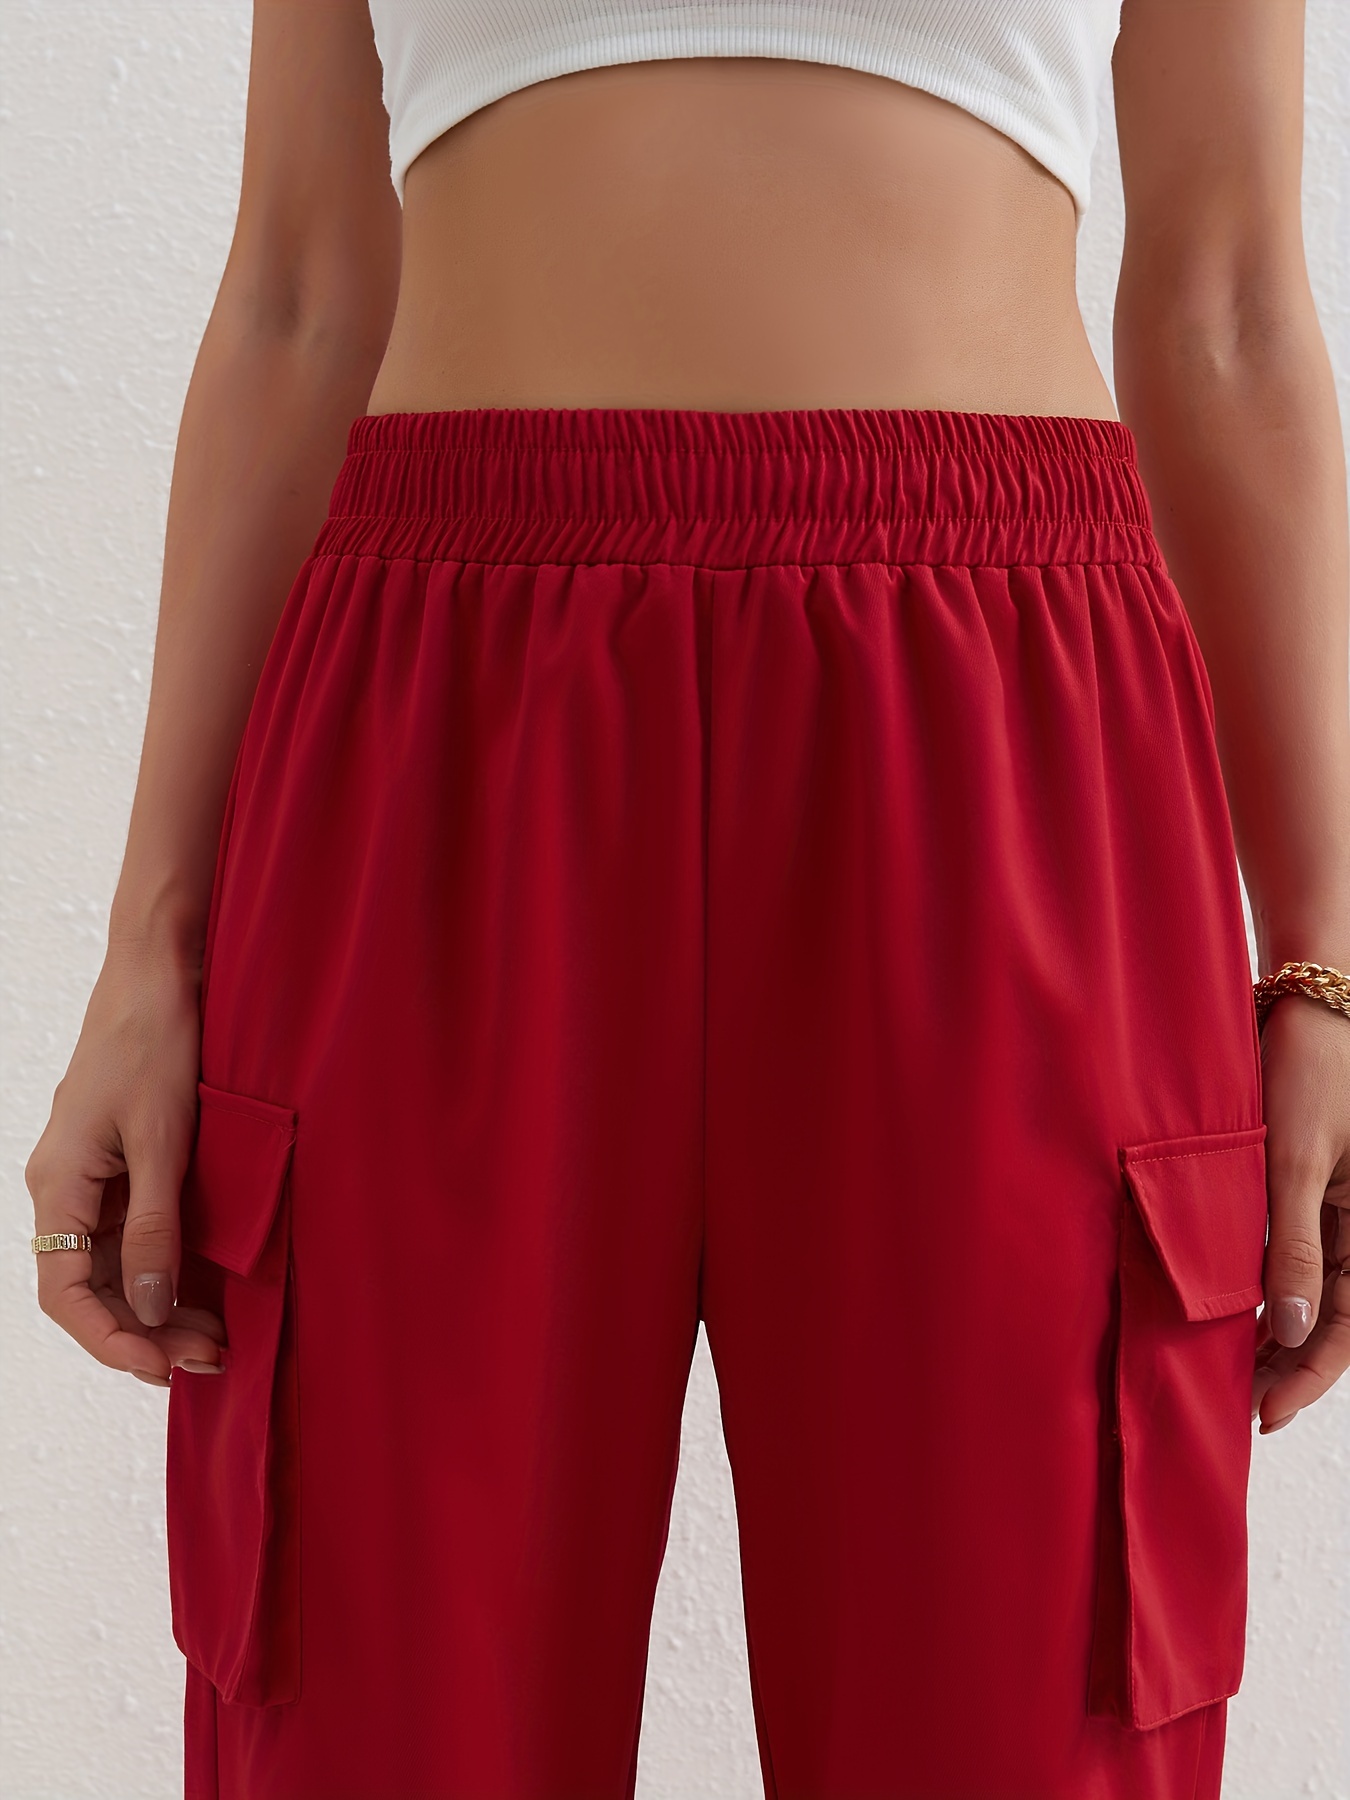 Spandex Pants Forever 21 Burgundy Stretchy Zipper Button Large